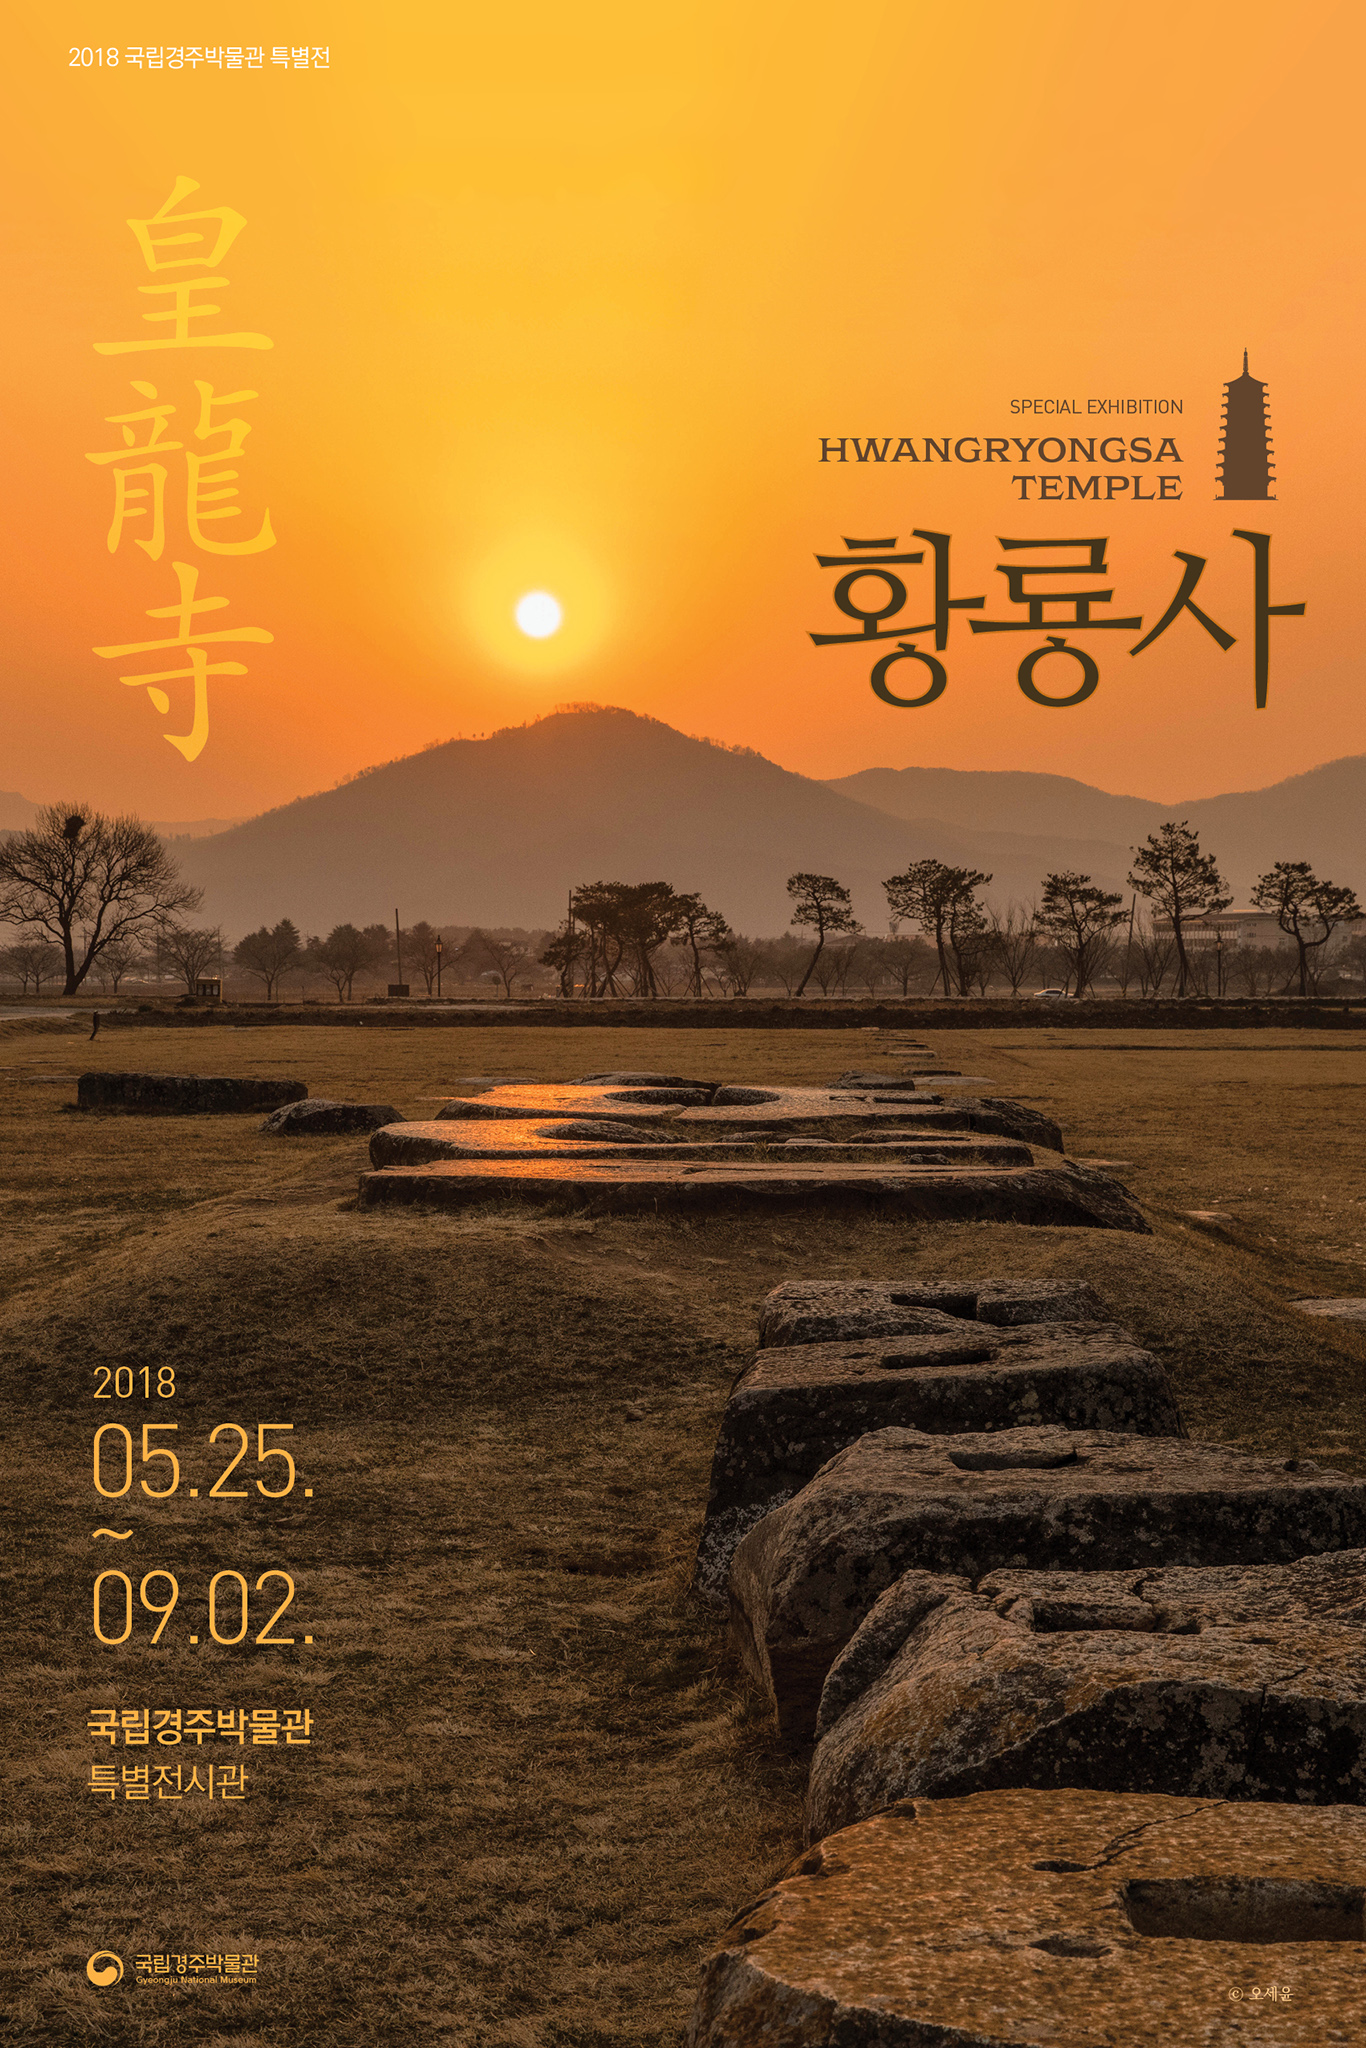 You are currently viewing 2018 국립경주박물관 특별전 – 황룡사